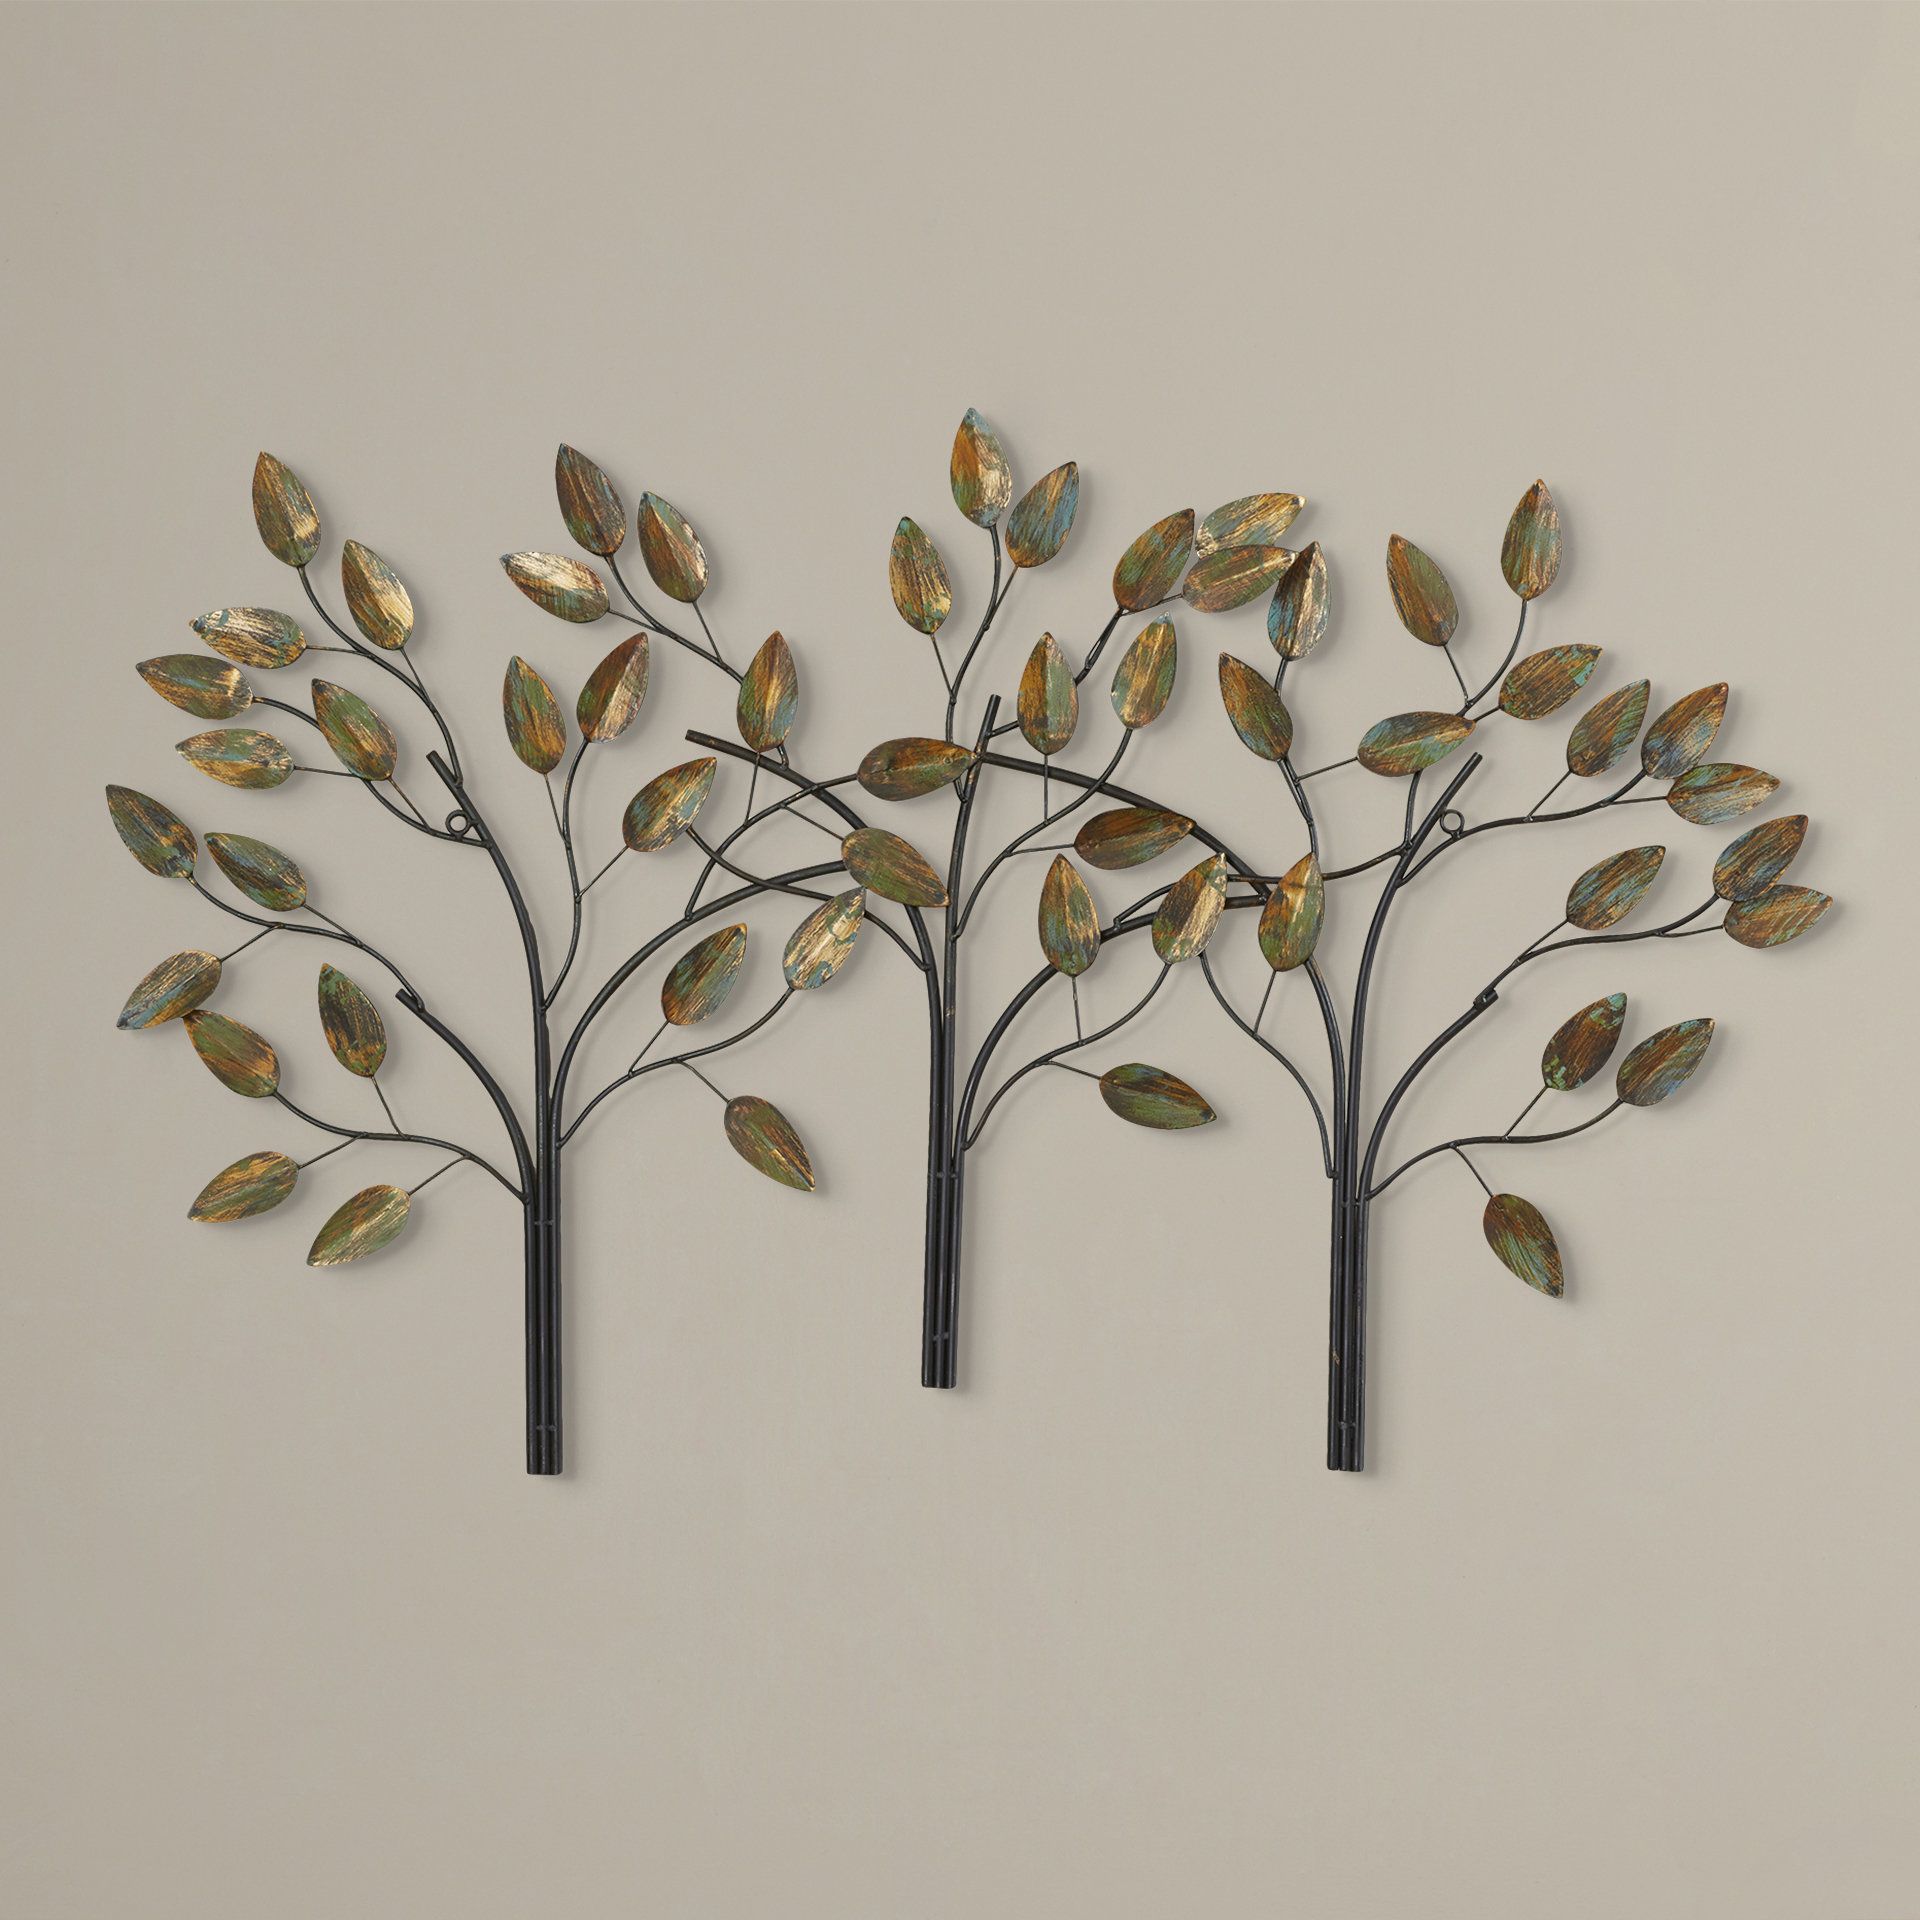 Charlton Home Desford Leaf Wall Décor & Reviews | Wayfair With Desford Leaf Wall Decor By Charlton Home (View 1 of 30)